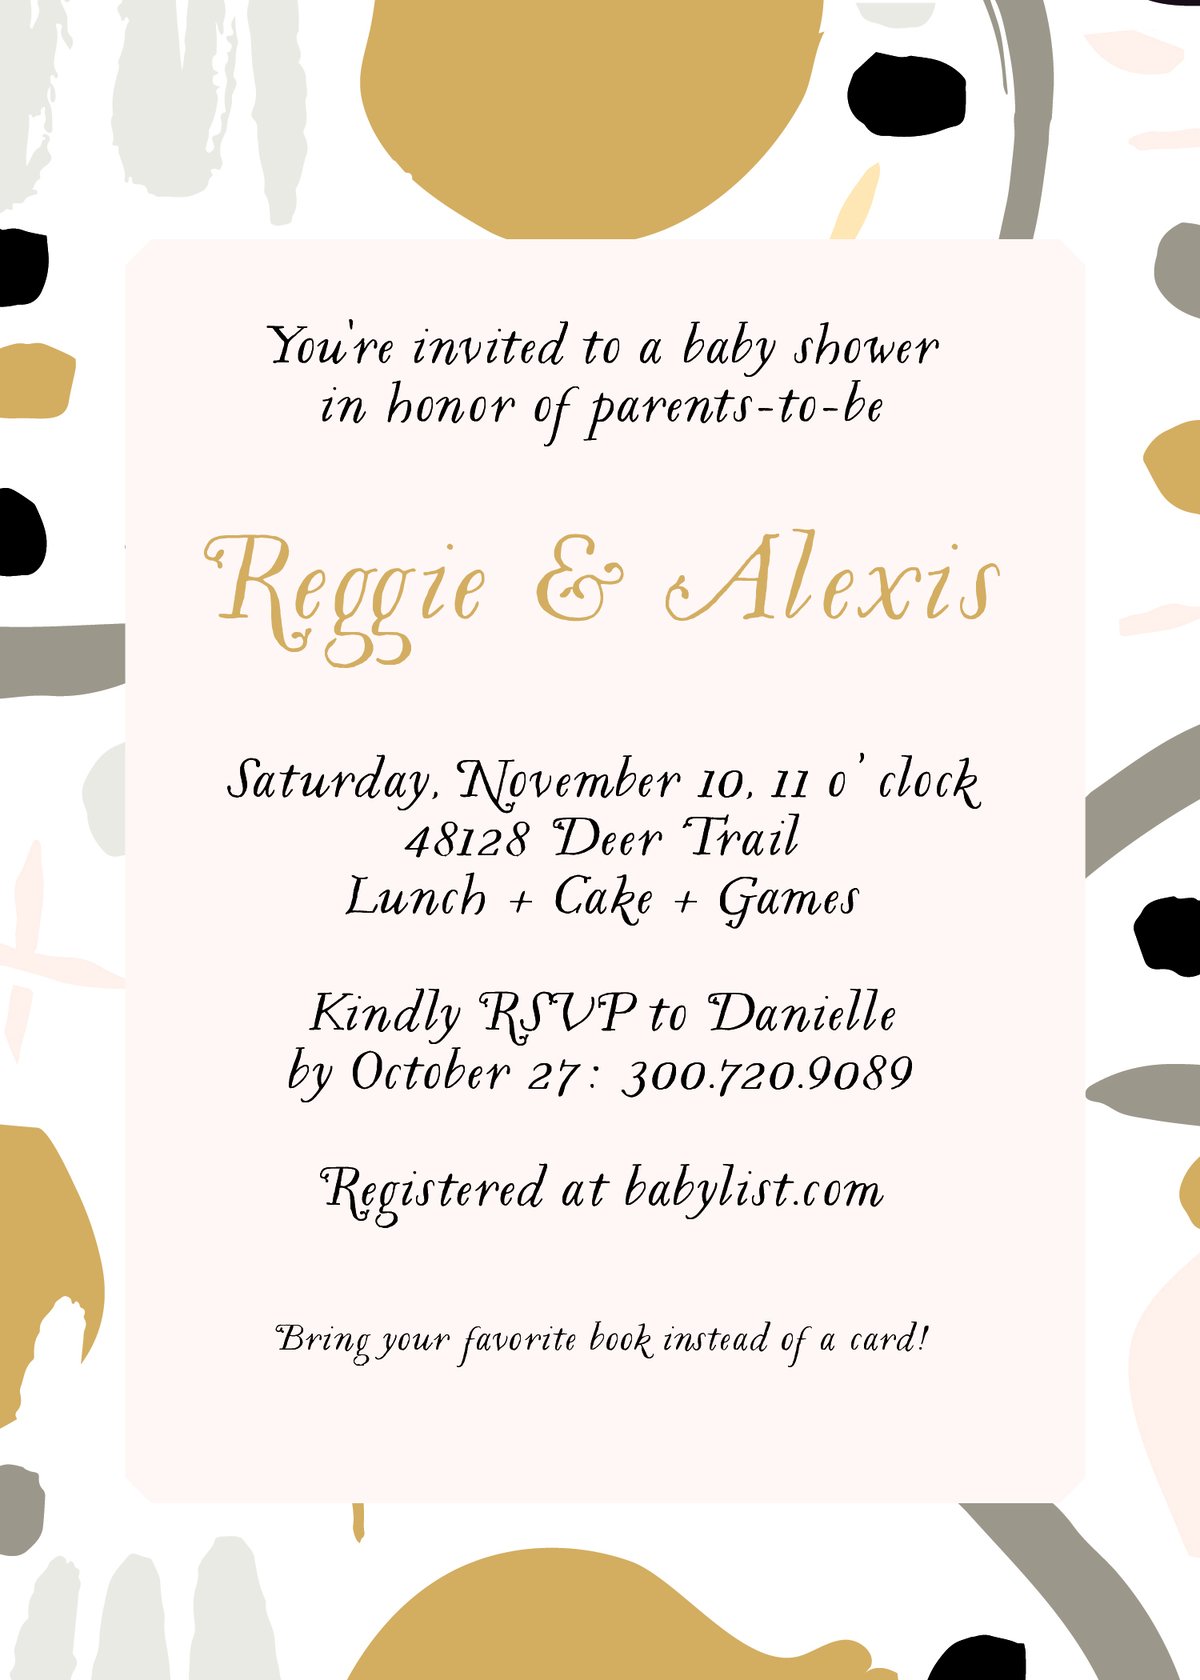 Abstract Art Baby Shower